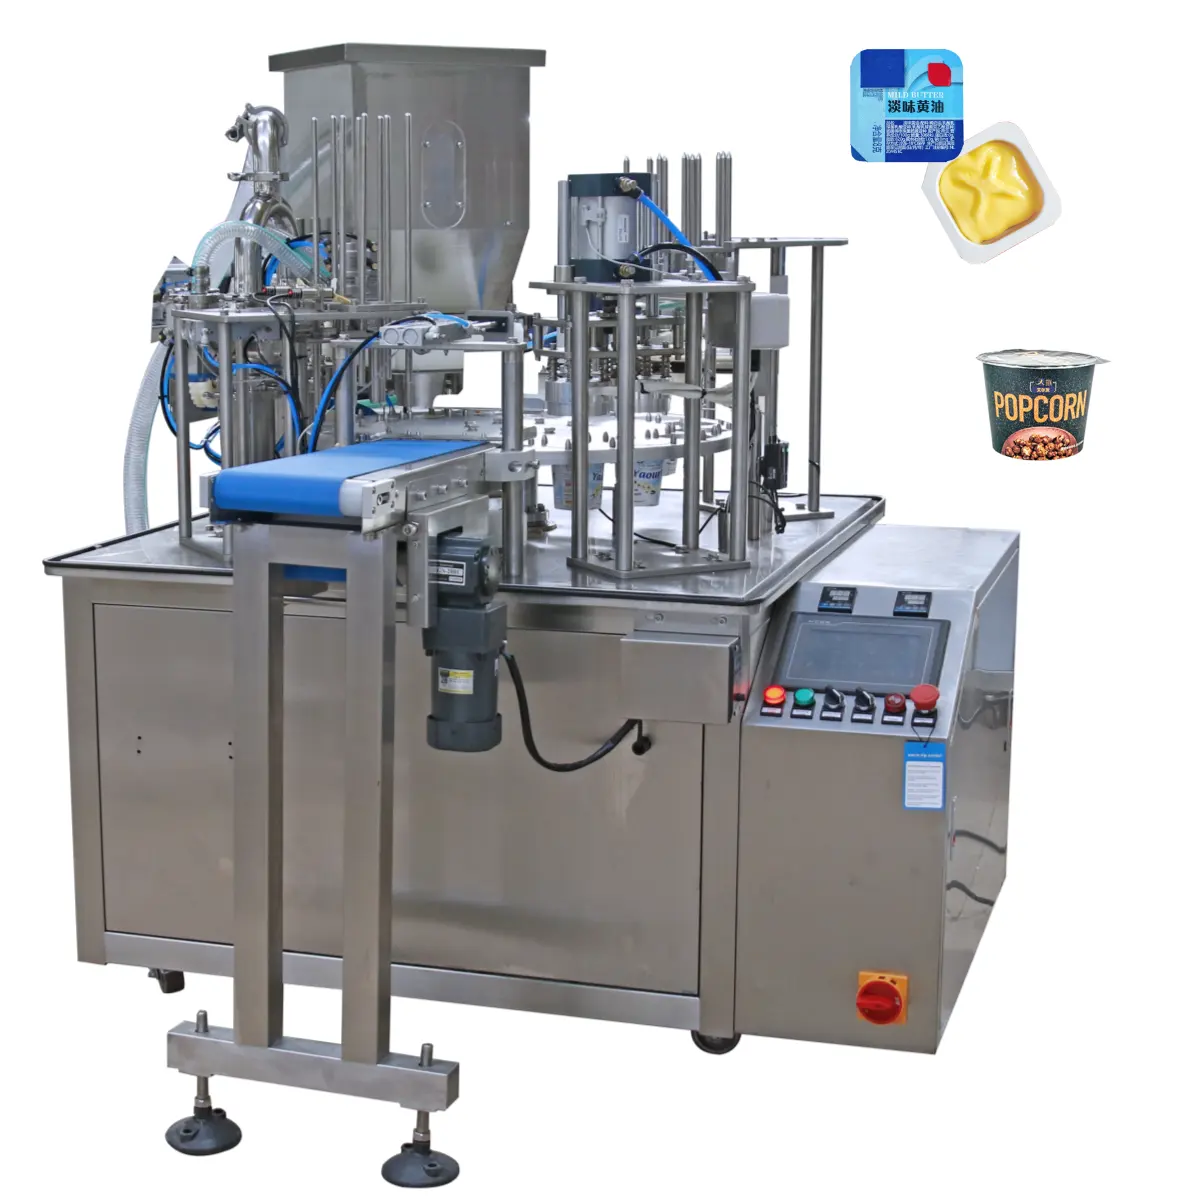 Multi-Function Auto Rotary Peanut Butter Yogurt Jelly Dipping Sauce Plastic Cup Filling Sealing Machine